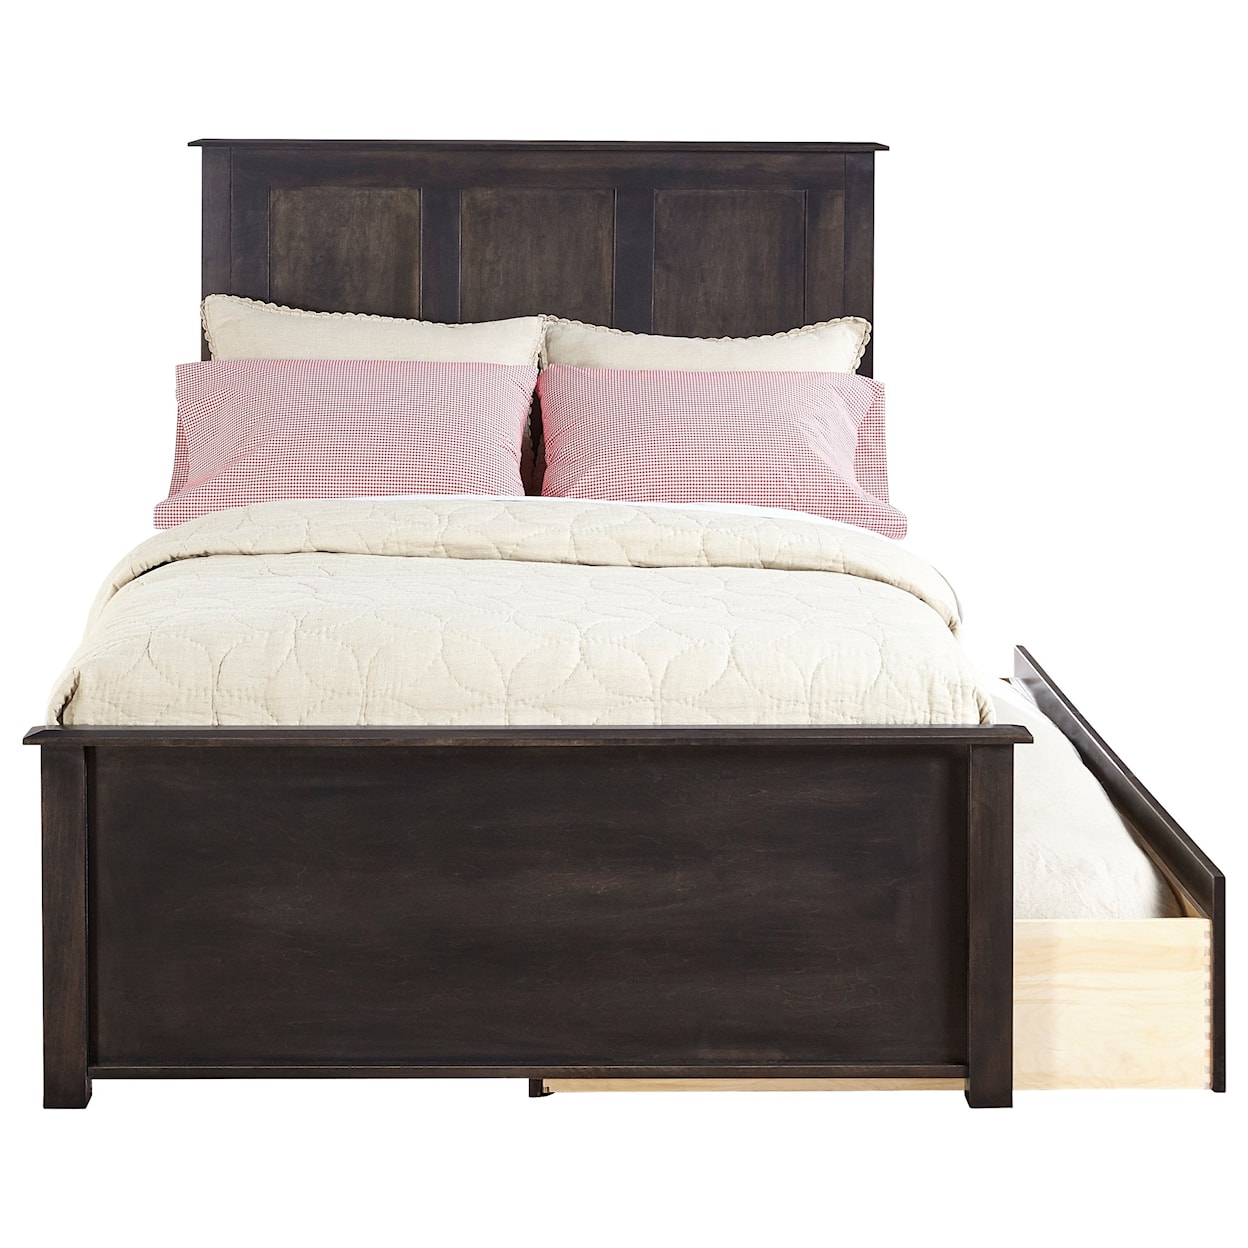 Daniel's Amish Manchester Full Panel Bed with Trundle